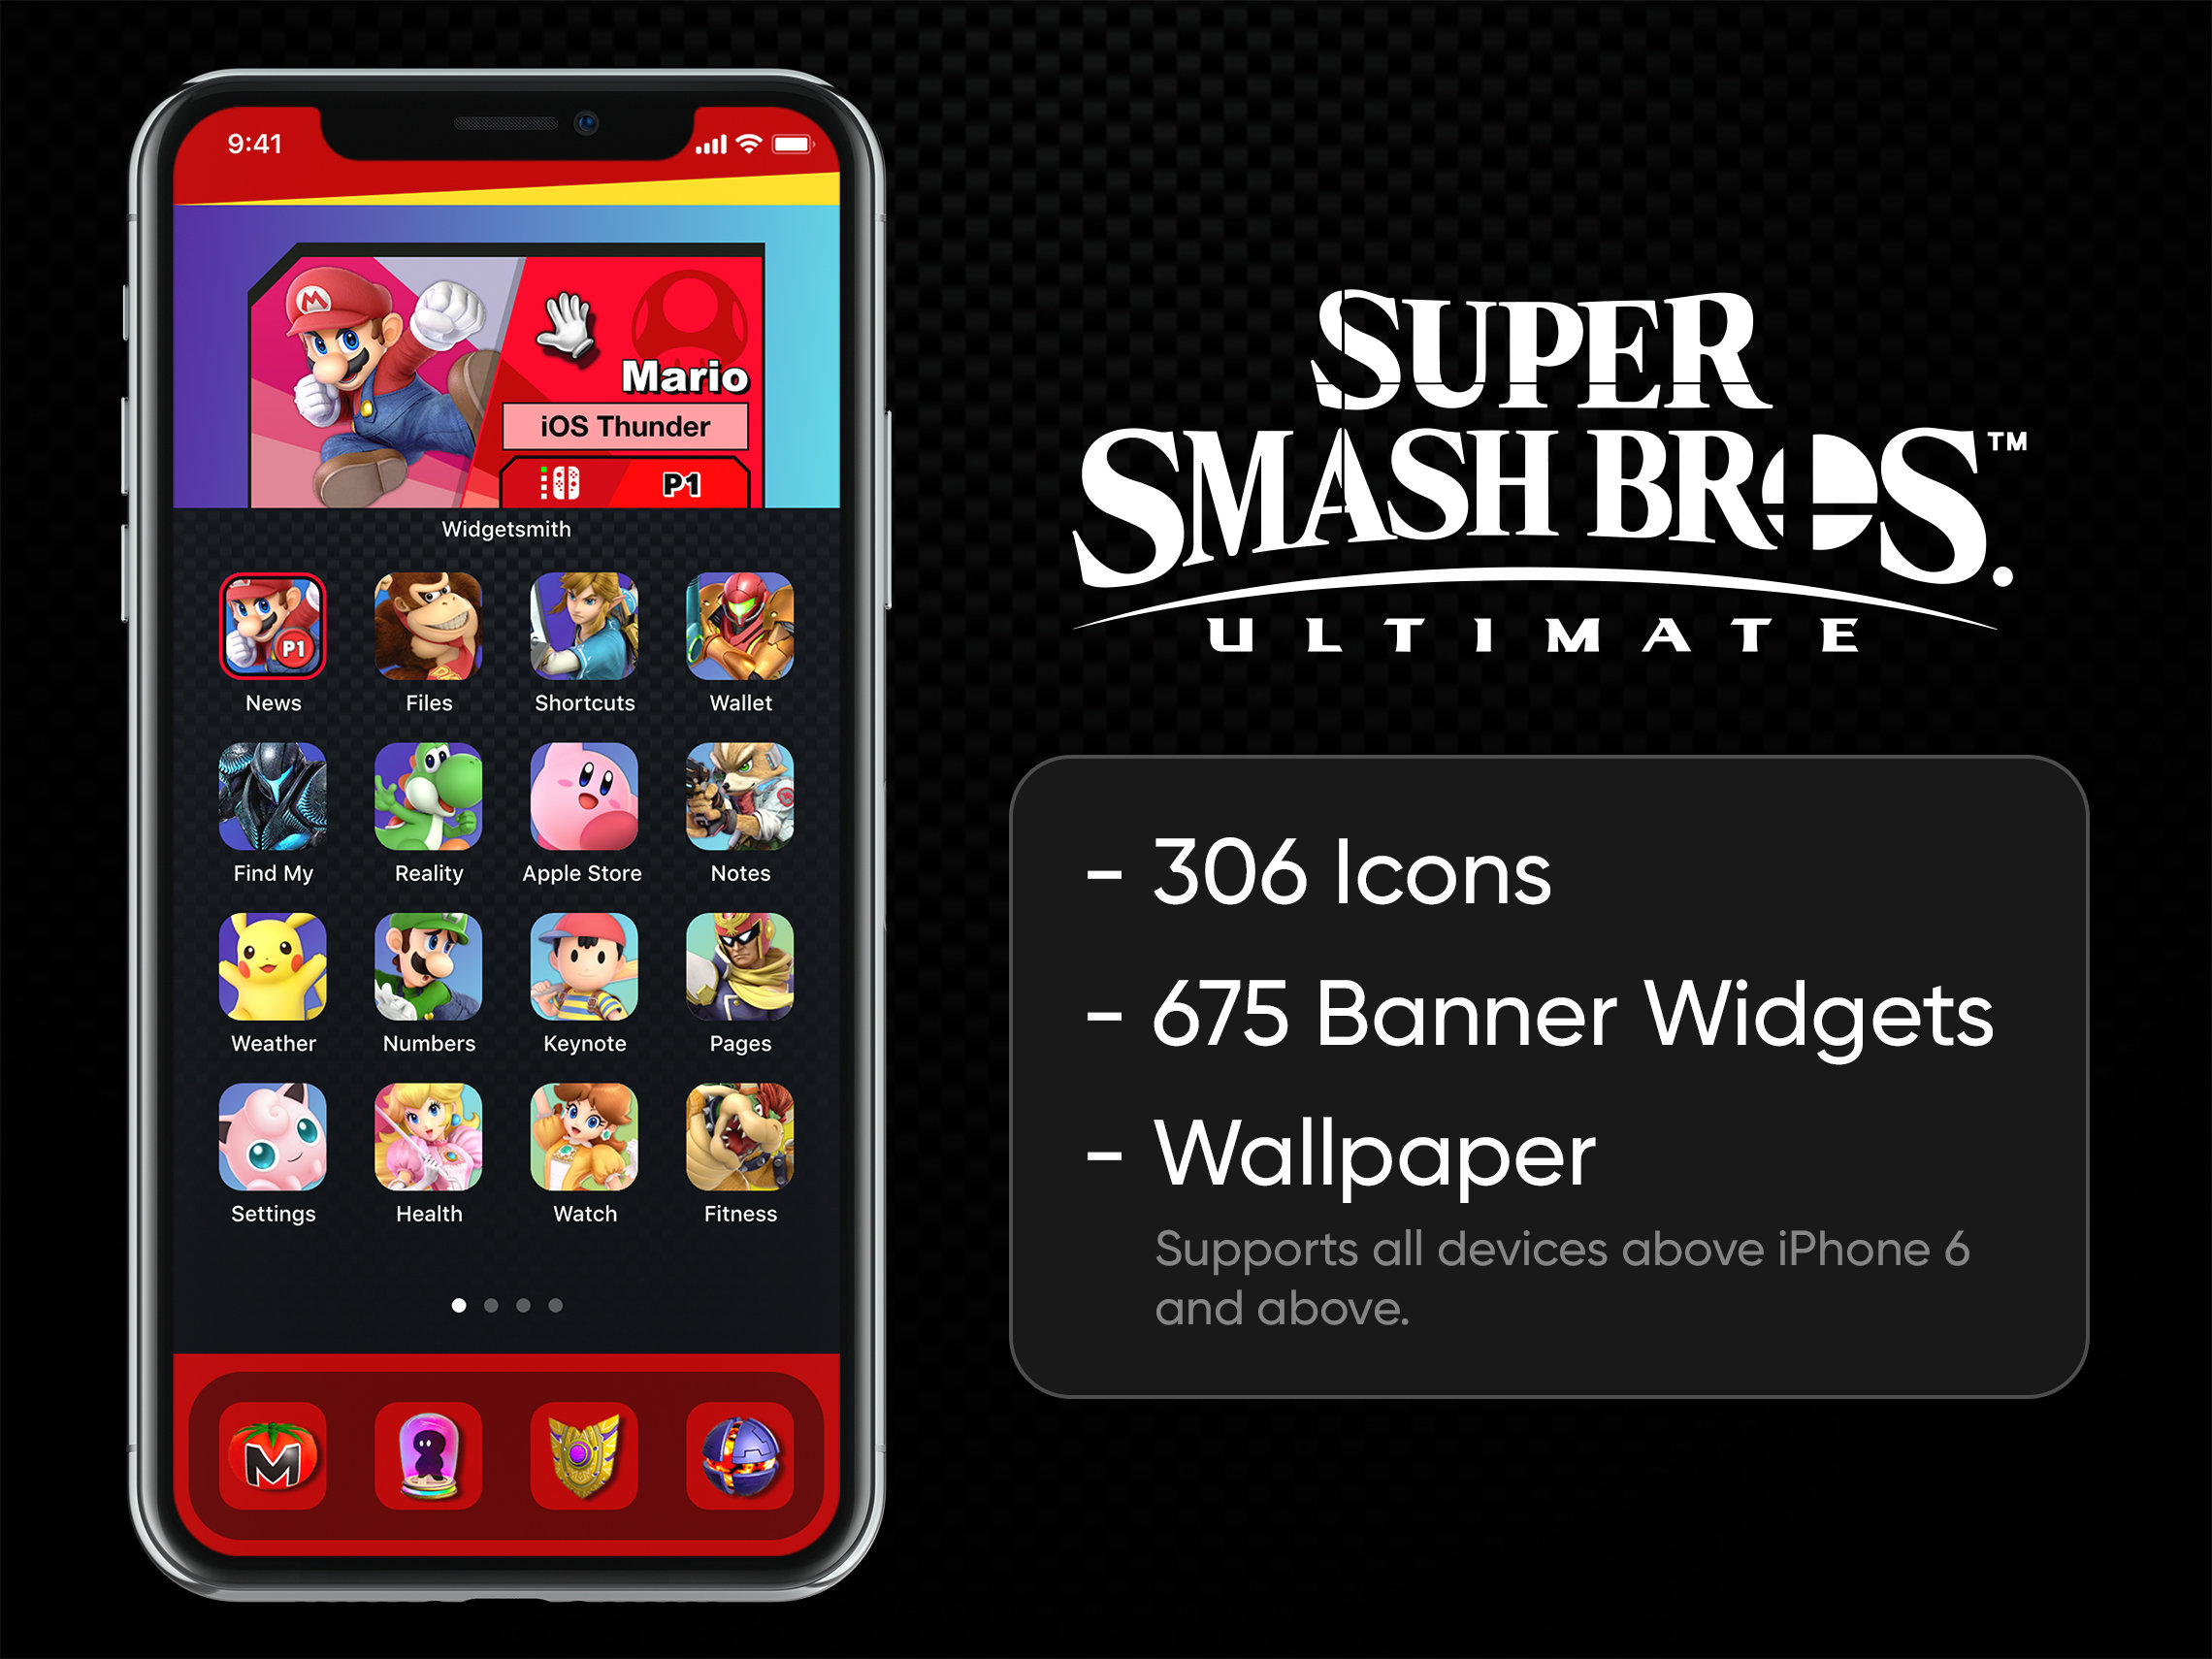 Smash mobile apps are available for Android and iOS